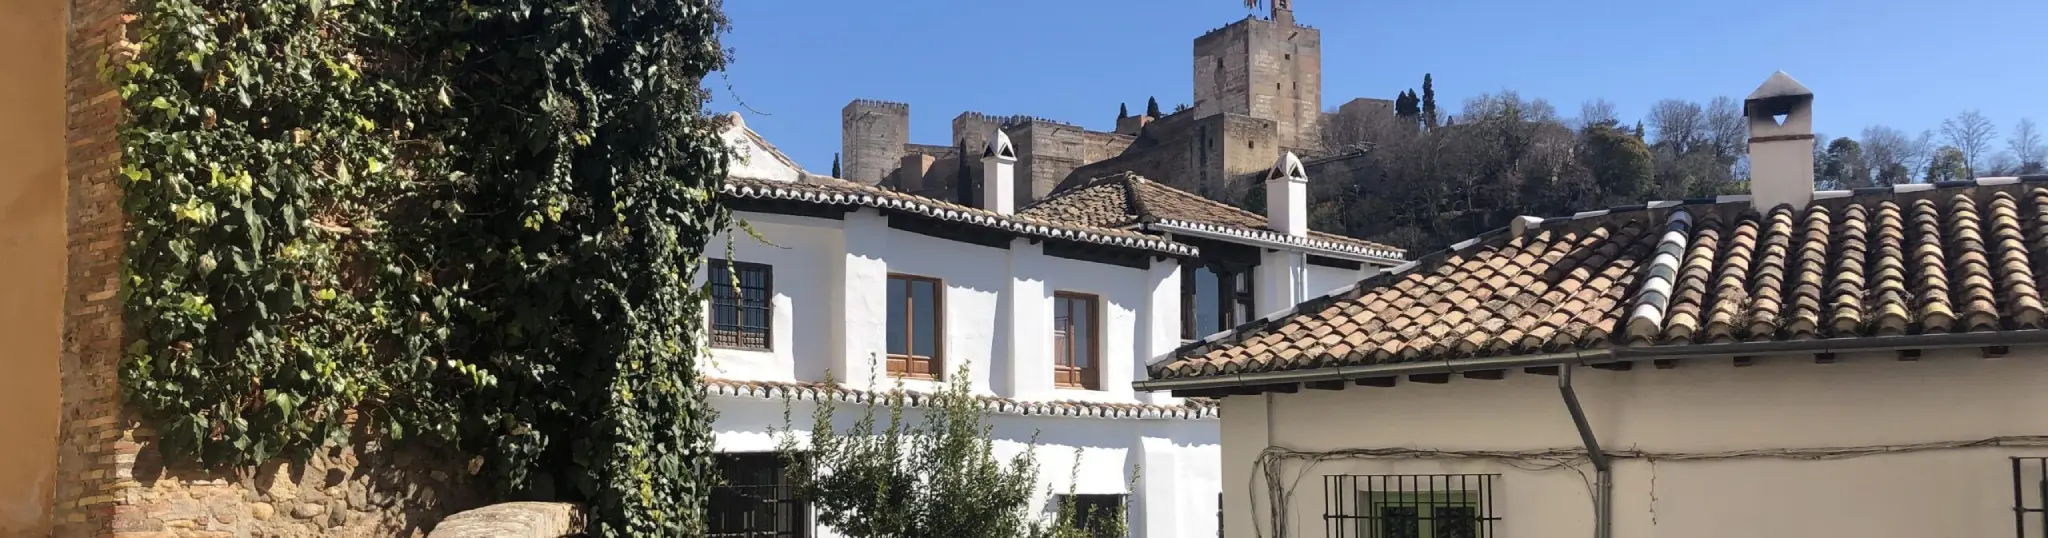 roofs of spanish-style homes